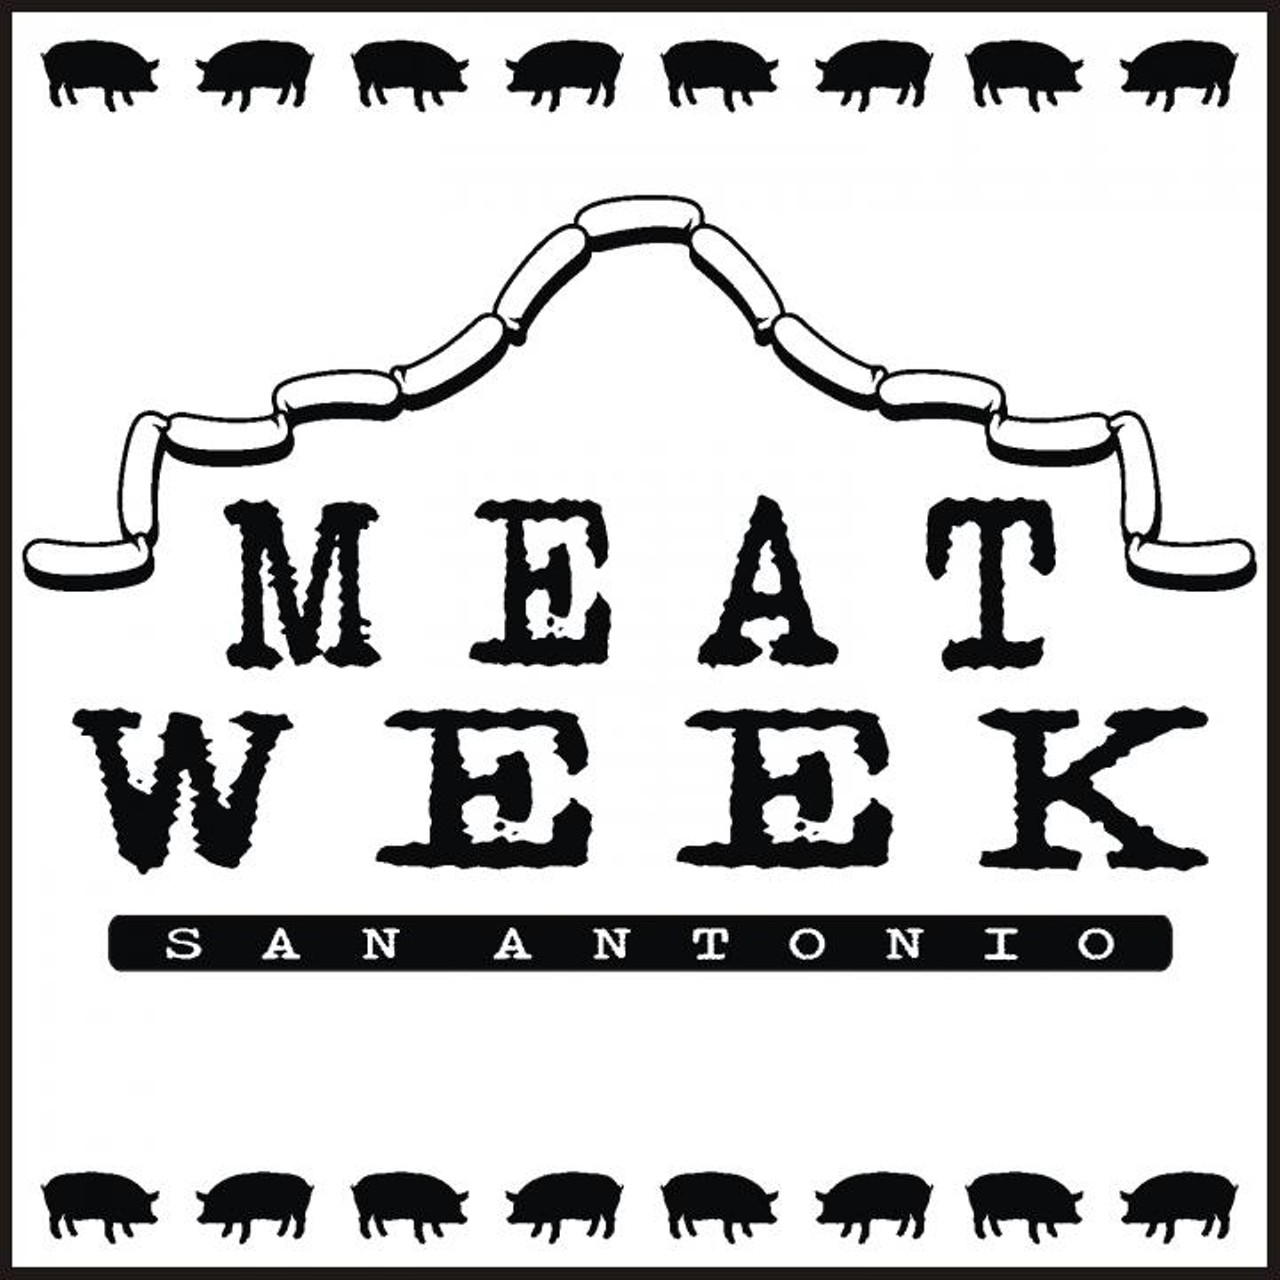 While we all know that every week is Meat Week here in SATX, this one deserves the moniker.  A tradition started in Florida back in 2005 by a couple of bored coworkers, the carnivorous celebration has spread throughout the country, with chapters in 25 cities.
Part of the Meat Week experience involves crowd sourcing Meat Week "hype" from participants all over, and we find that these submissions really jive with our Texan palettes. 
Check out the hilarious/ridiculous collection of hype then take a gander at the Meat Week San Antonio schedule.